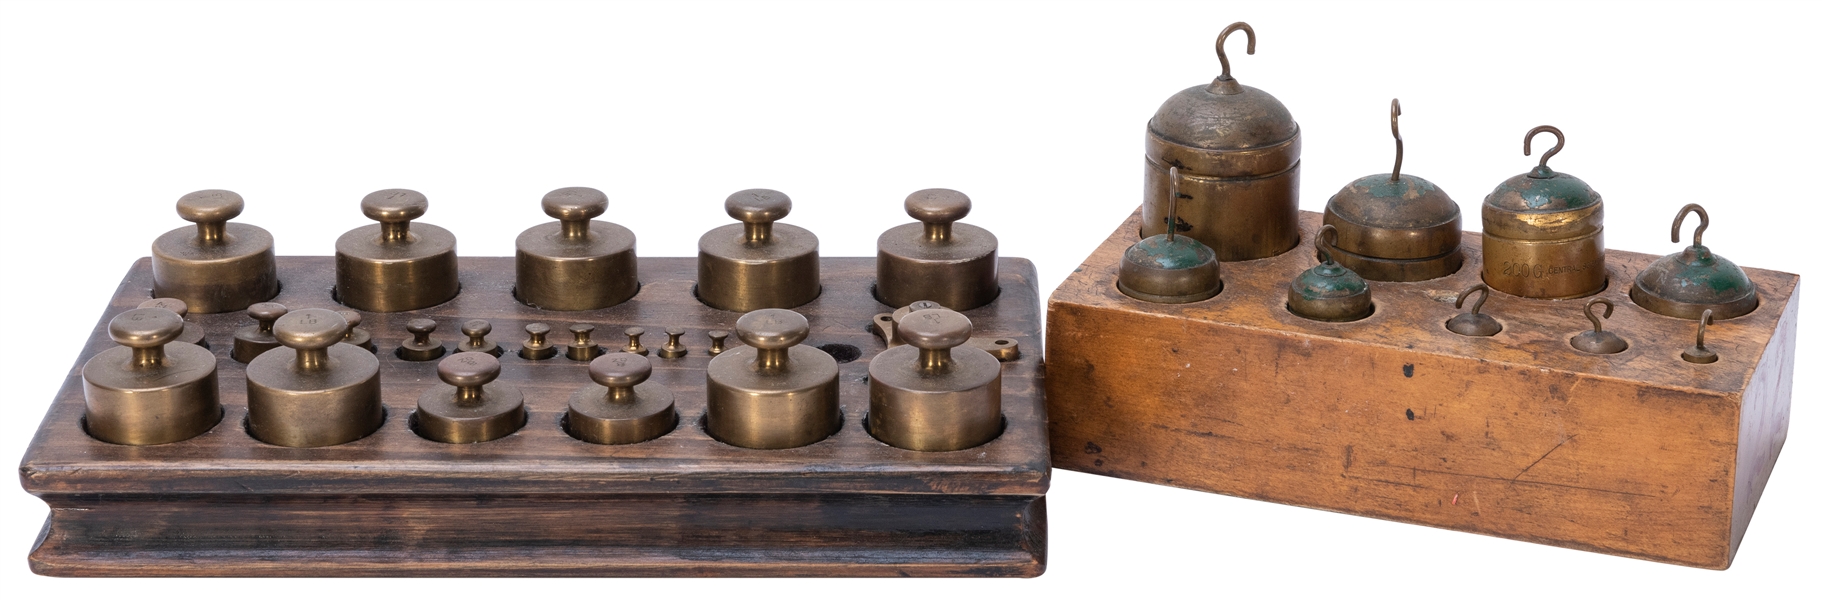  Two Early Brass Weight Sets. Both sets in fitted wood cases...